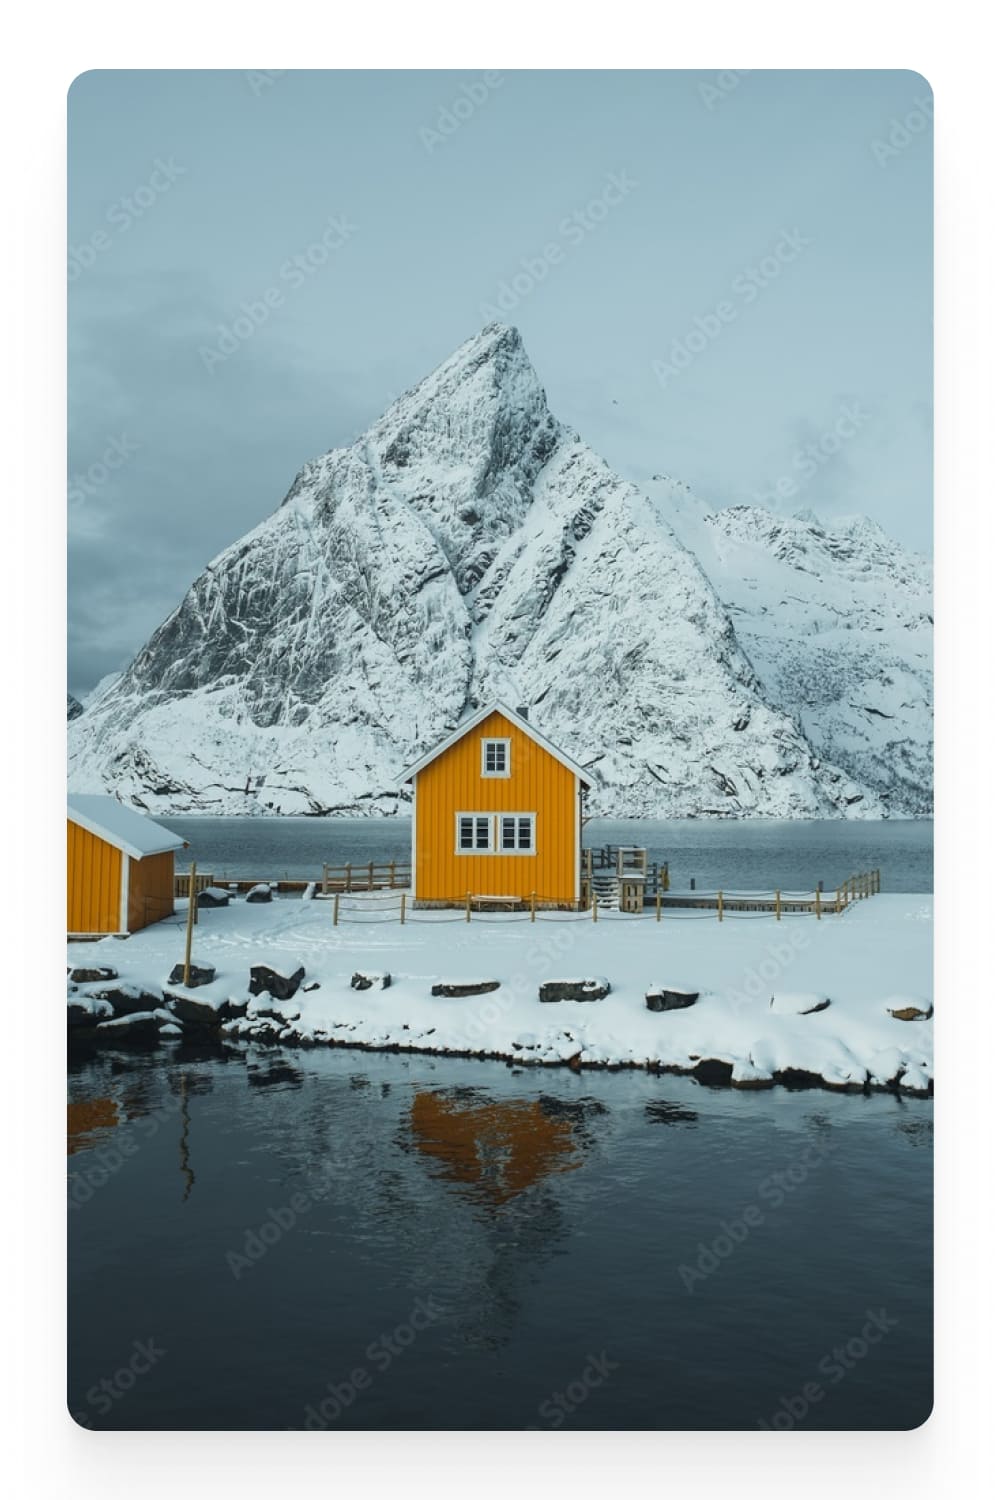 Photo of a yellow house on a snowy island.